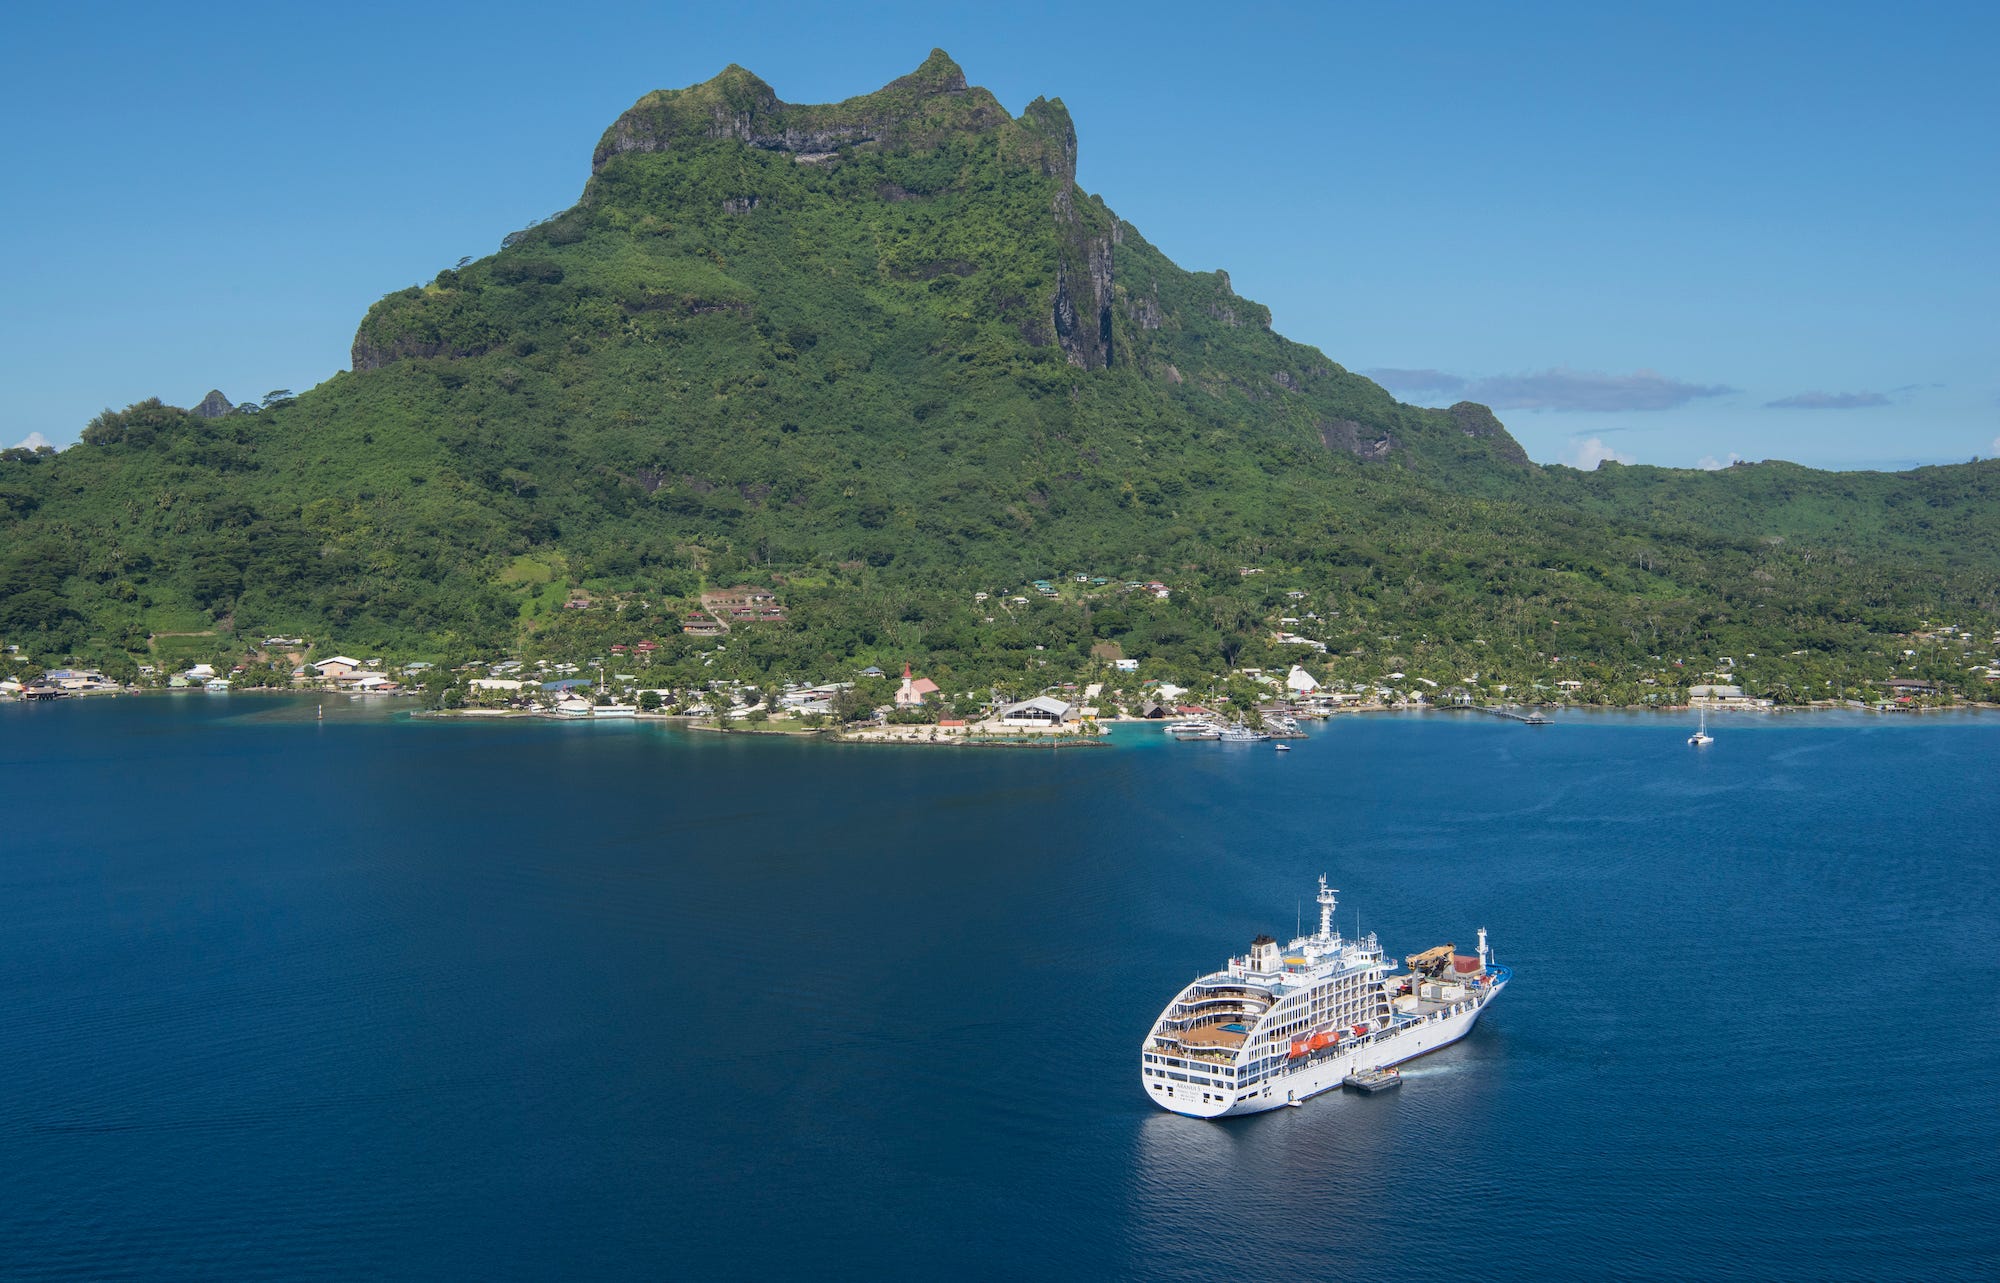 <p>Luescher said French Polynesia is one of the best luxury destinations for 2024 because it's underrated and uncrowded.</p><p>Luescher describes the region, which consists of five archipelagos and 118 islands, as a "completely unspoiled" alternative to Hawaii due to its dazzling coastline and luxury accommodation options.</p><p>Luescher recommends staying in an overwater bungalow. Although he didn't specify a specific resort, the island has many options, including the overwater villas at <a href="https://www.leborabora.com/x,999,1044,2342,,,/pool-overwater-villa.html">Le Bora Bora by Pearl Resorts</a> and the <a href="https://www.fourseasons.com/borabora/">Four Seasons</a>, which offers overwater and beachfront villas.</p>